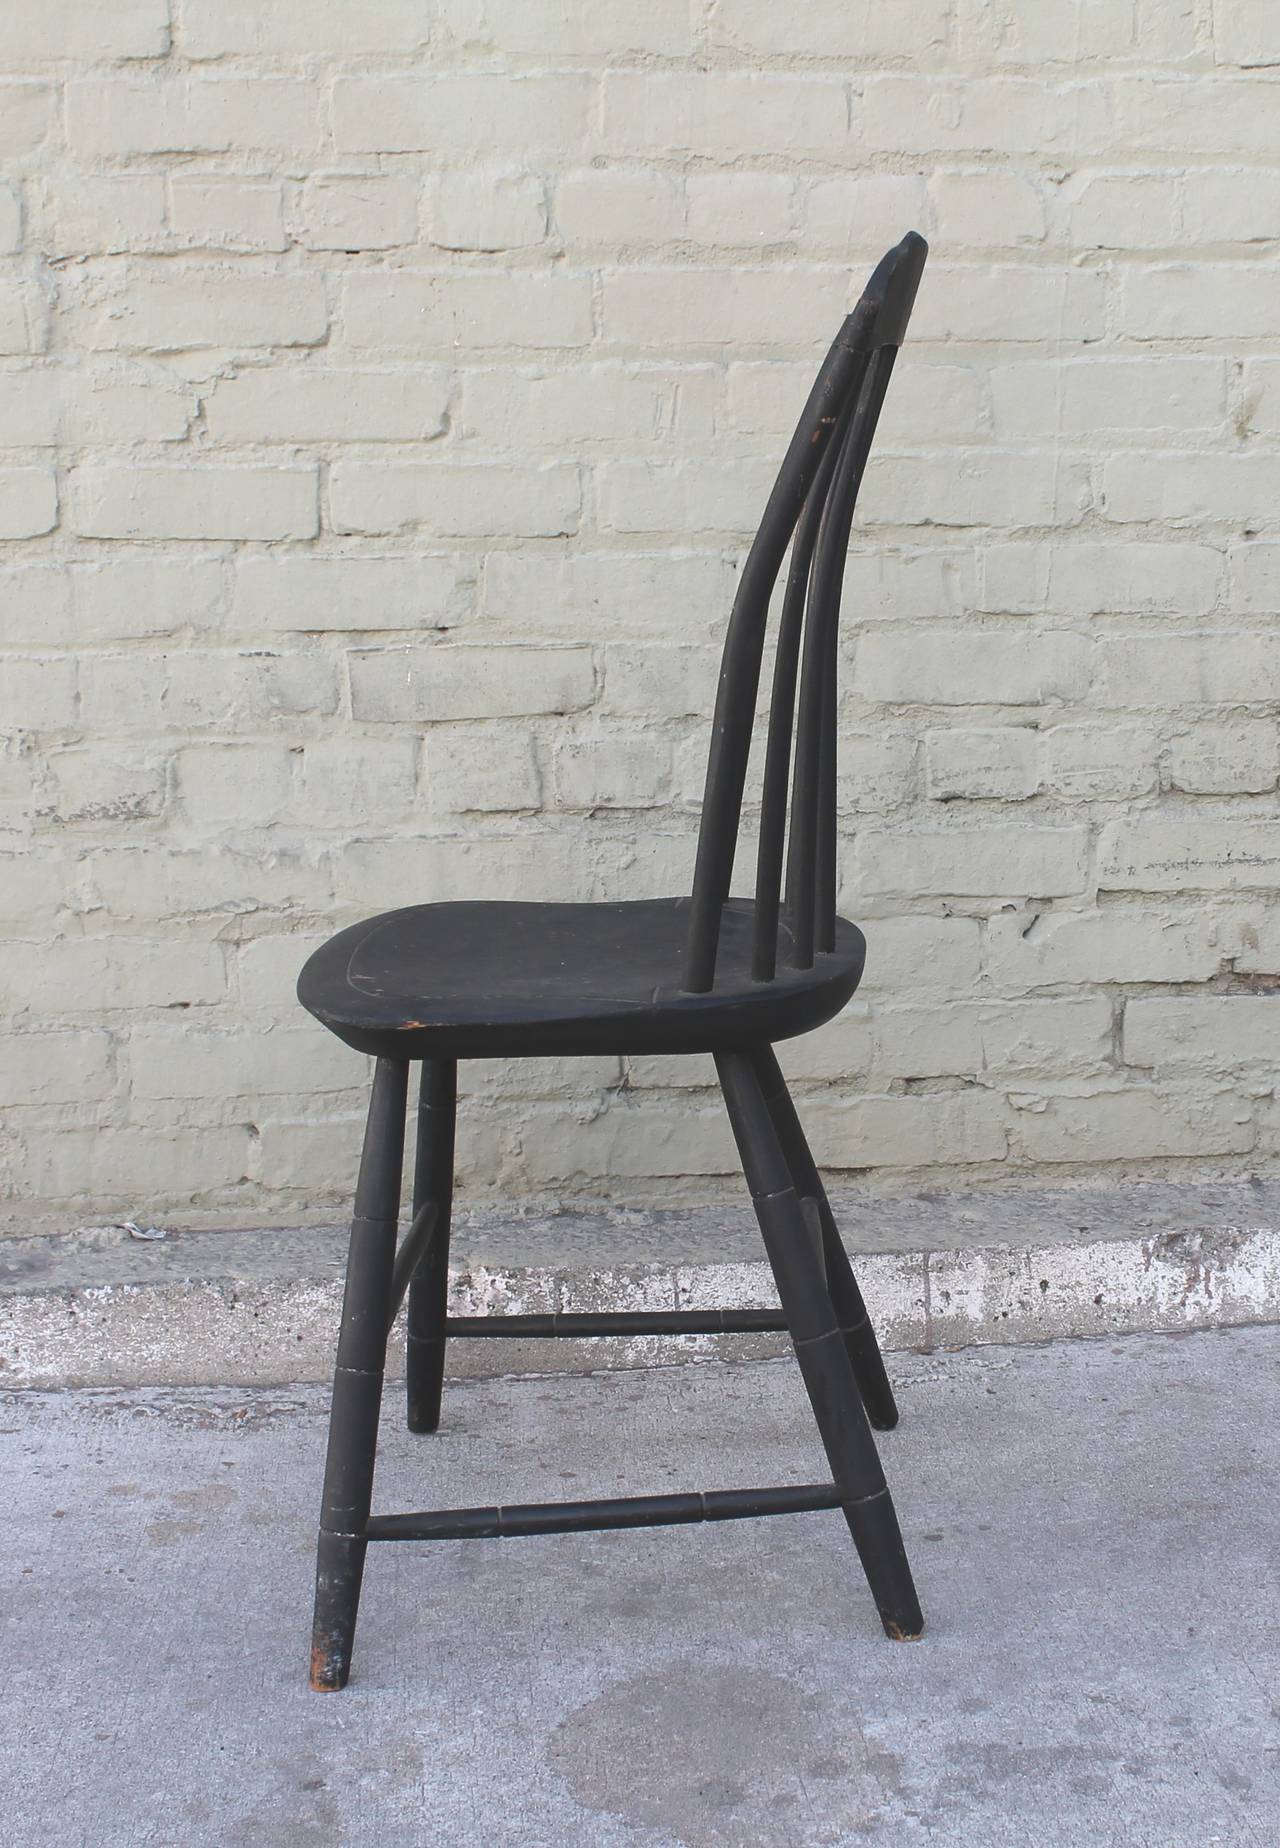 Original Black Painted Step Down New England Windsor Chair, Dated 1812 In Excellent Condition For Sale In Los Angeles, CA